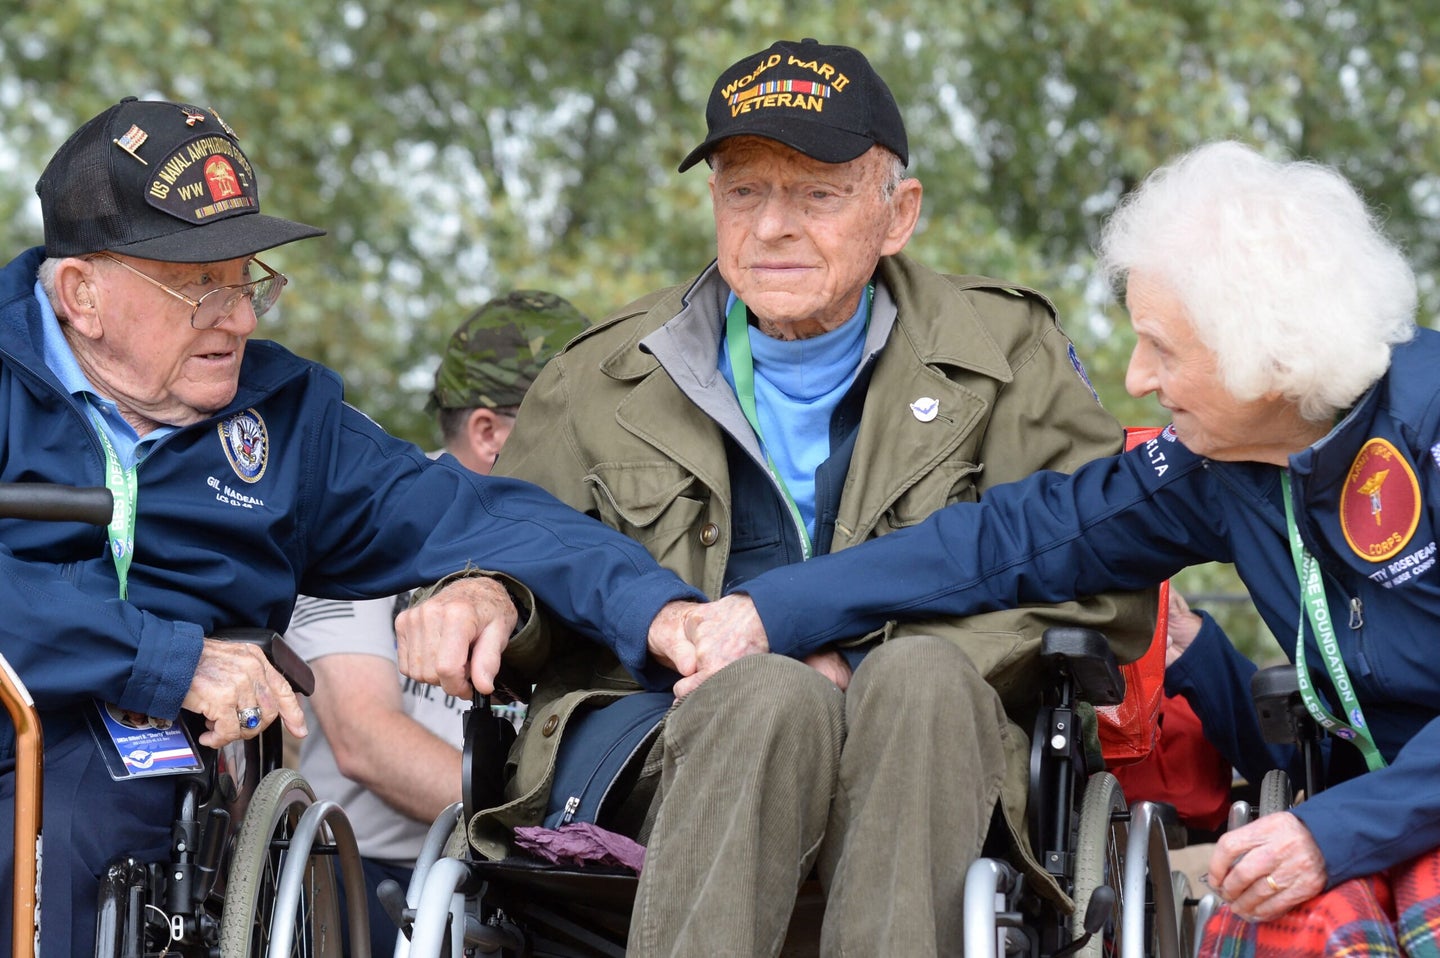 US World War II veterans: 2Lt Betty L. Huffman-Rosevear (Army Nurse Corps) (R) shakes hands with US Navy veteran SM3c Gilbert D. Nadeau (aka "Shorty") next to US veteran Andre Chappaz (C) from the 1885th Aviation Engineer Battalion, during the celebrations for the 78th D-Day anniversary, marking the WWII Normandy landings of June 6, 1944, in Sainte-Mere-Eglise on June 5, 2022. (Photo by JEAN-FRANCOIS MONIER / AFP) (Photo by JEAN-FRANCOIS MONIER/AFP via Getty Images)